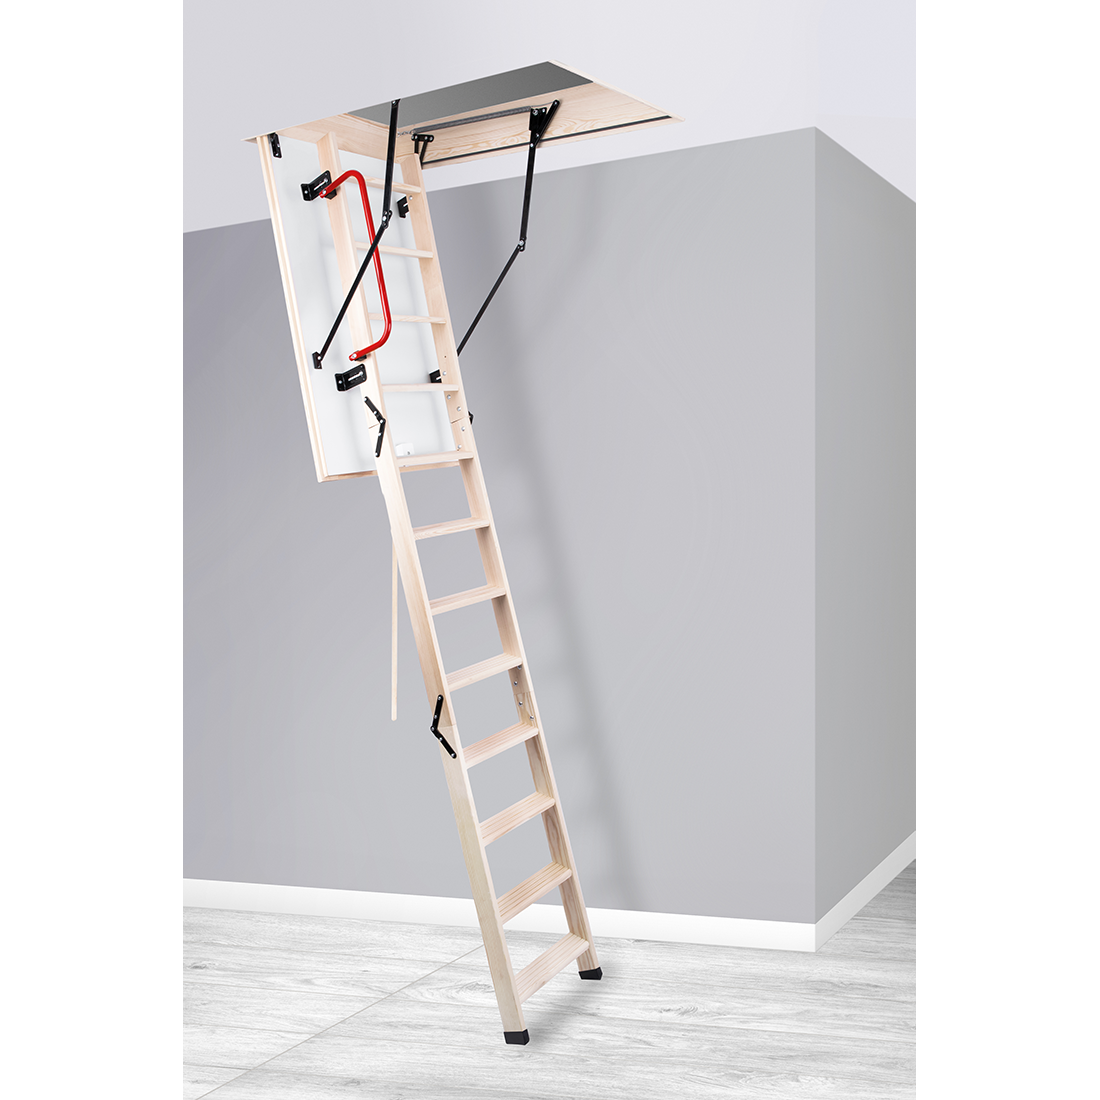 GLOB Wooden Attic Ladder 43" x 21.5" - Up to 9.18 feet